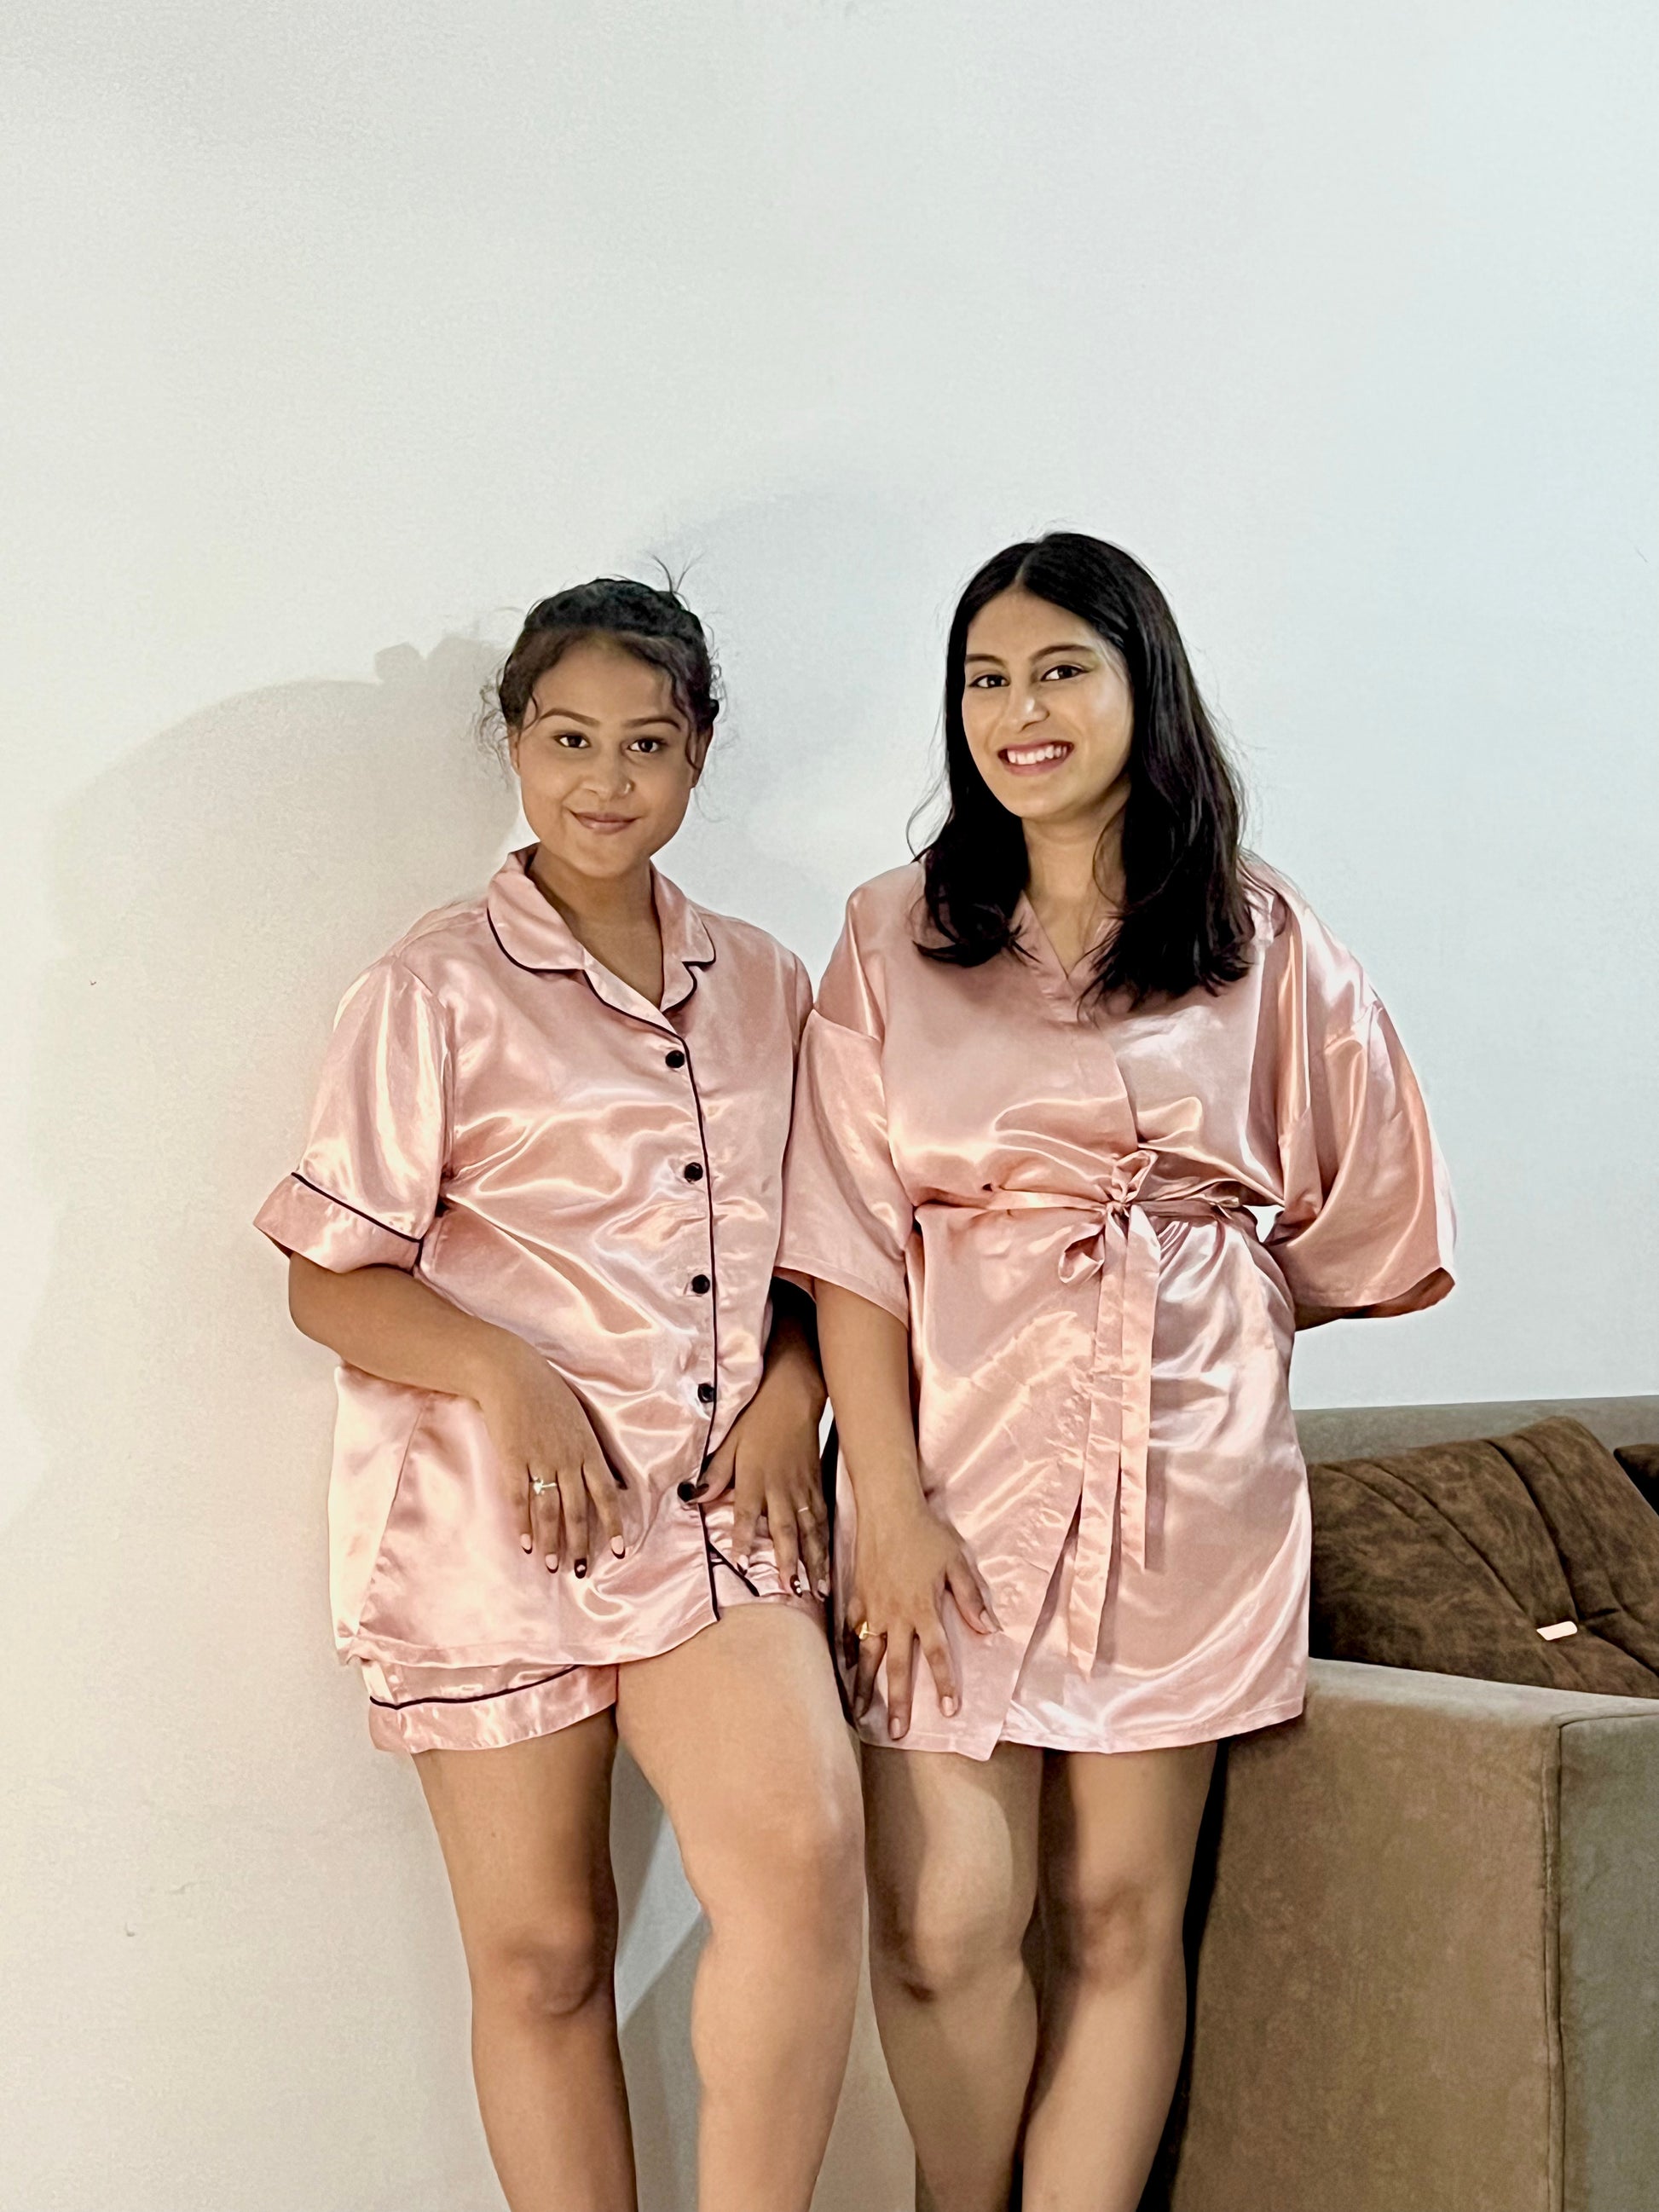 Weddings, Gifts & Mementos, Bridesmaids Gifts, Matching Pajamas Set, Bachelorette Party, Bachelorette, Bridesmaid Pajamas, Set of Pajamas, Bridesmaids Pajamas, Bridesmaid Gifts, Monogram Pjs, Gift for Bridesmaid, Pajamas Set, Bridal Pajamas, Green Pajamas, Bridesmaid Robes, Gifts for Girls, Birthday Gifts, Personalized Gifts, Gifts,